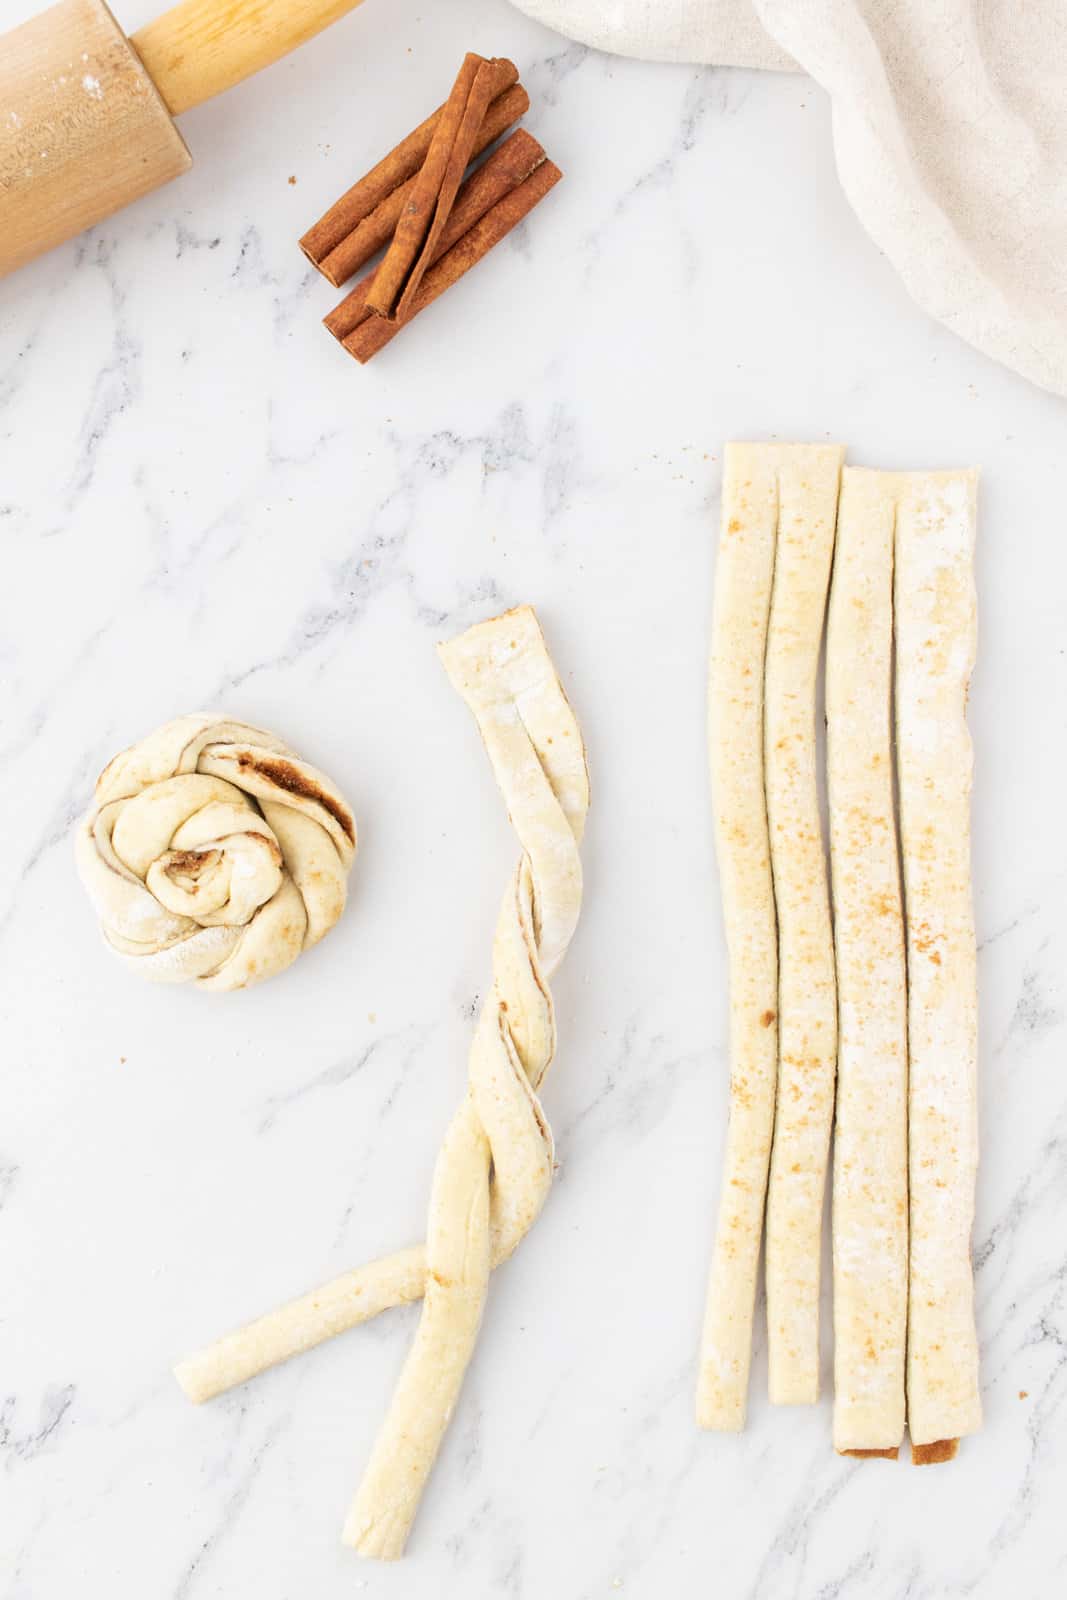 showing two puff pastry strips being twirled around each other.